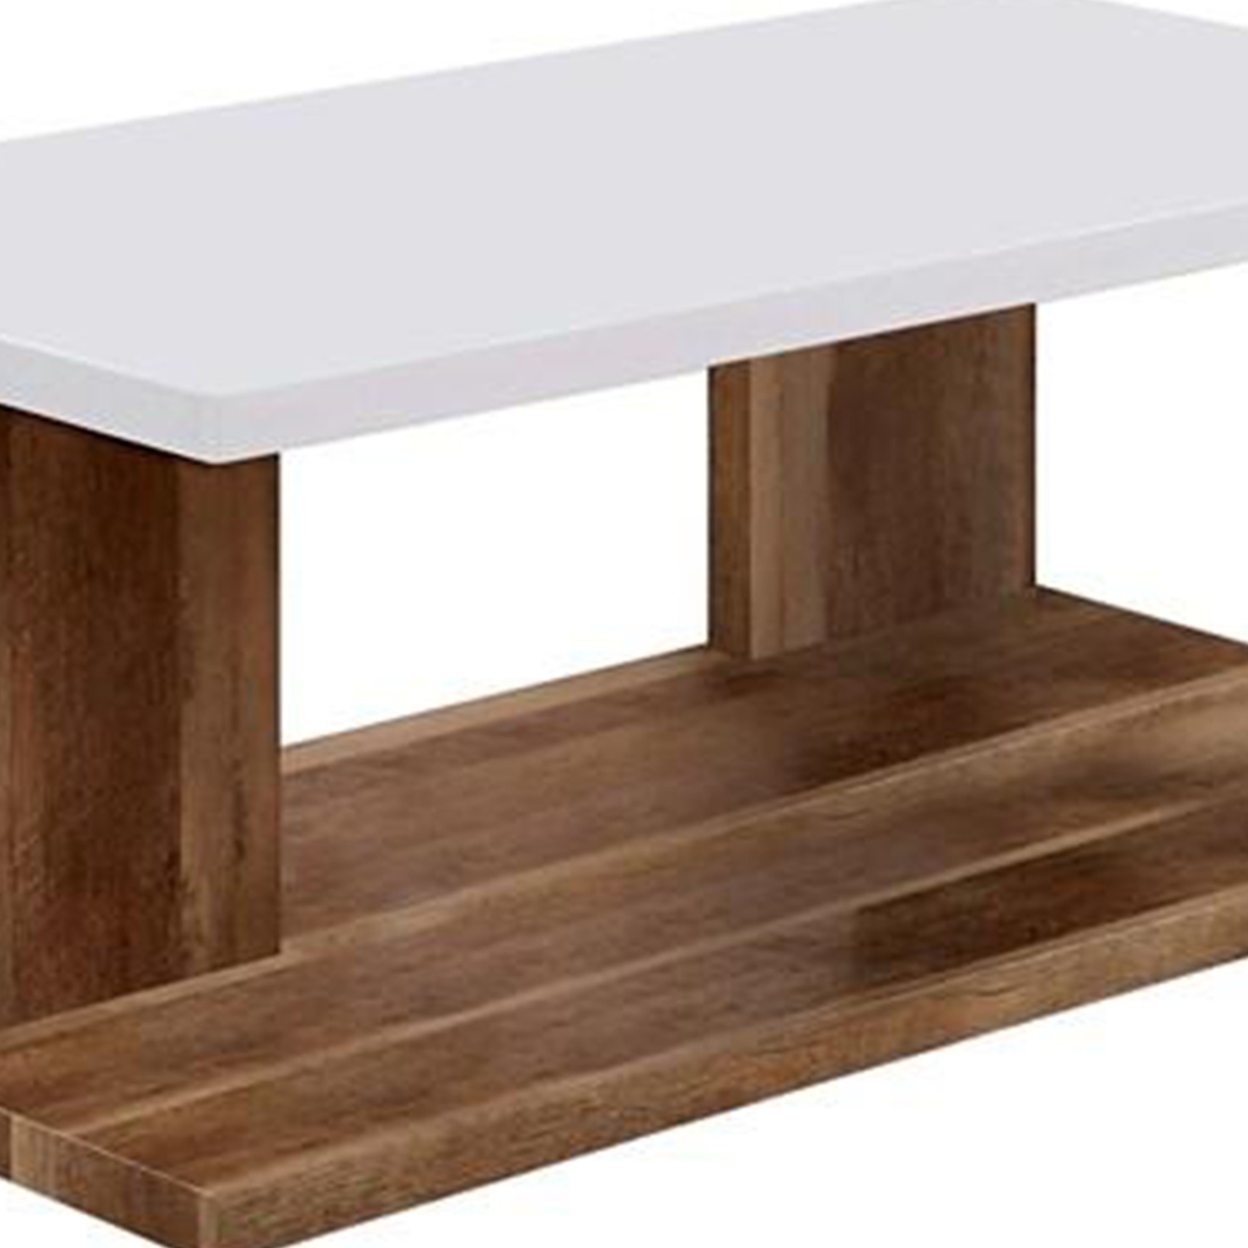 Coffee Table With Open Shelf And Rectangular Panel Legs, Brown And White- Saltoro Sherpi